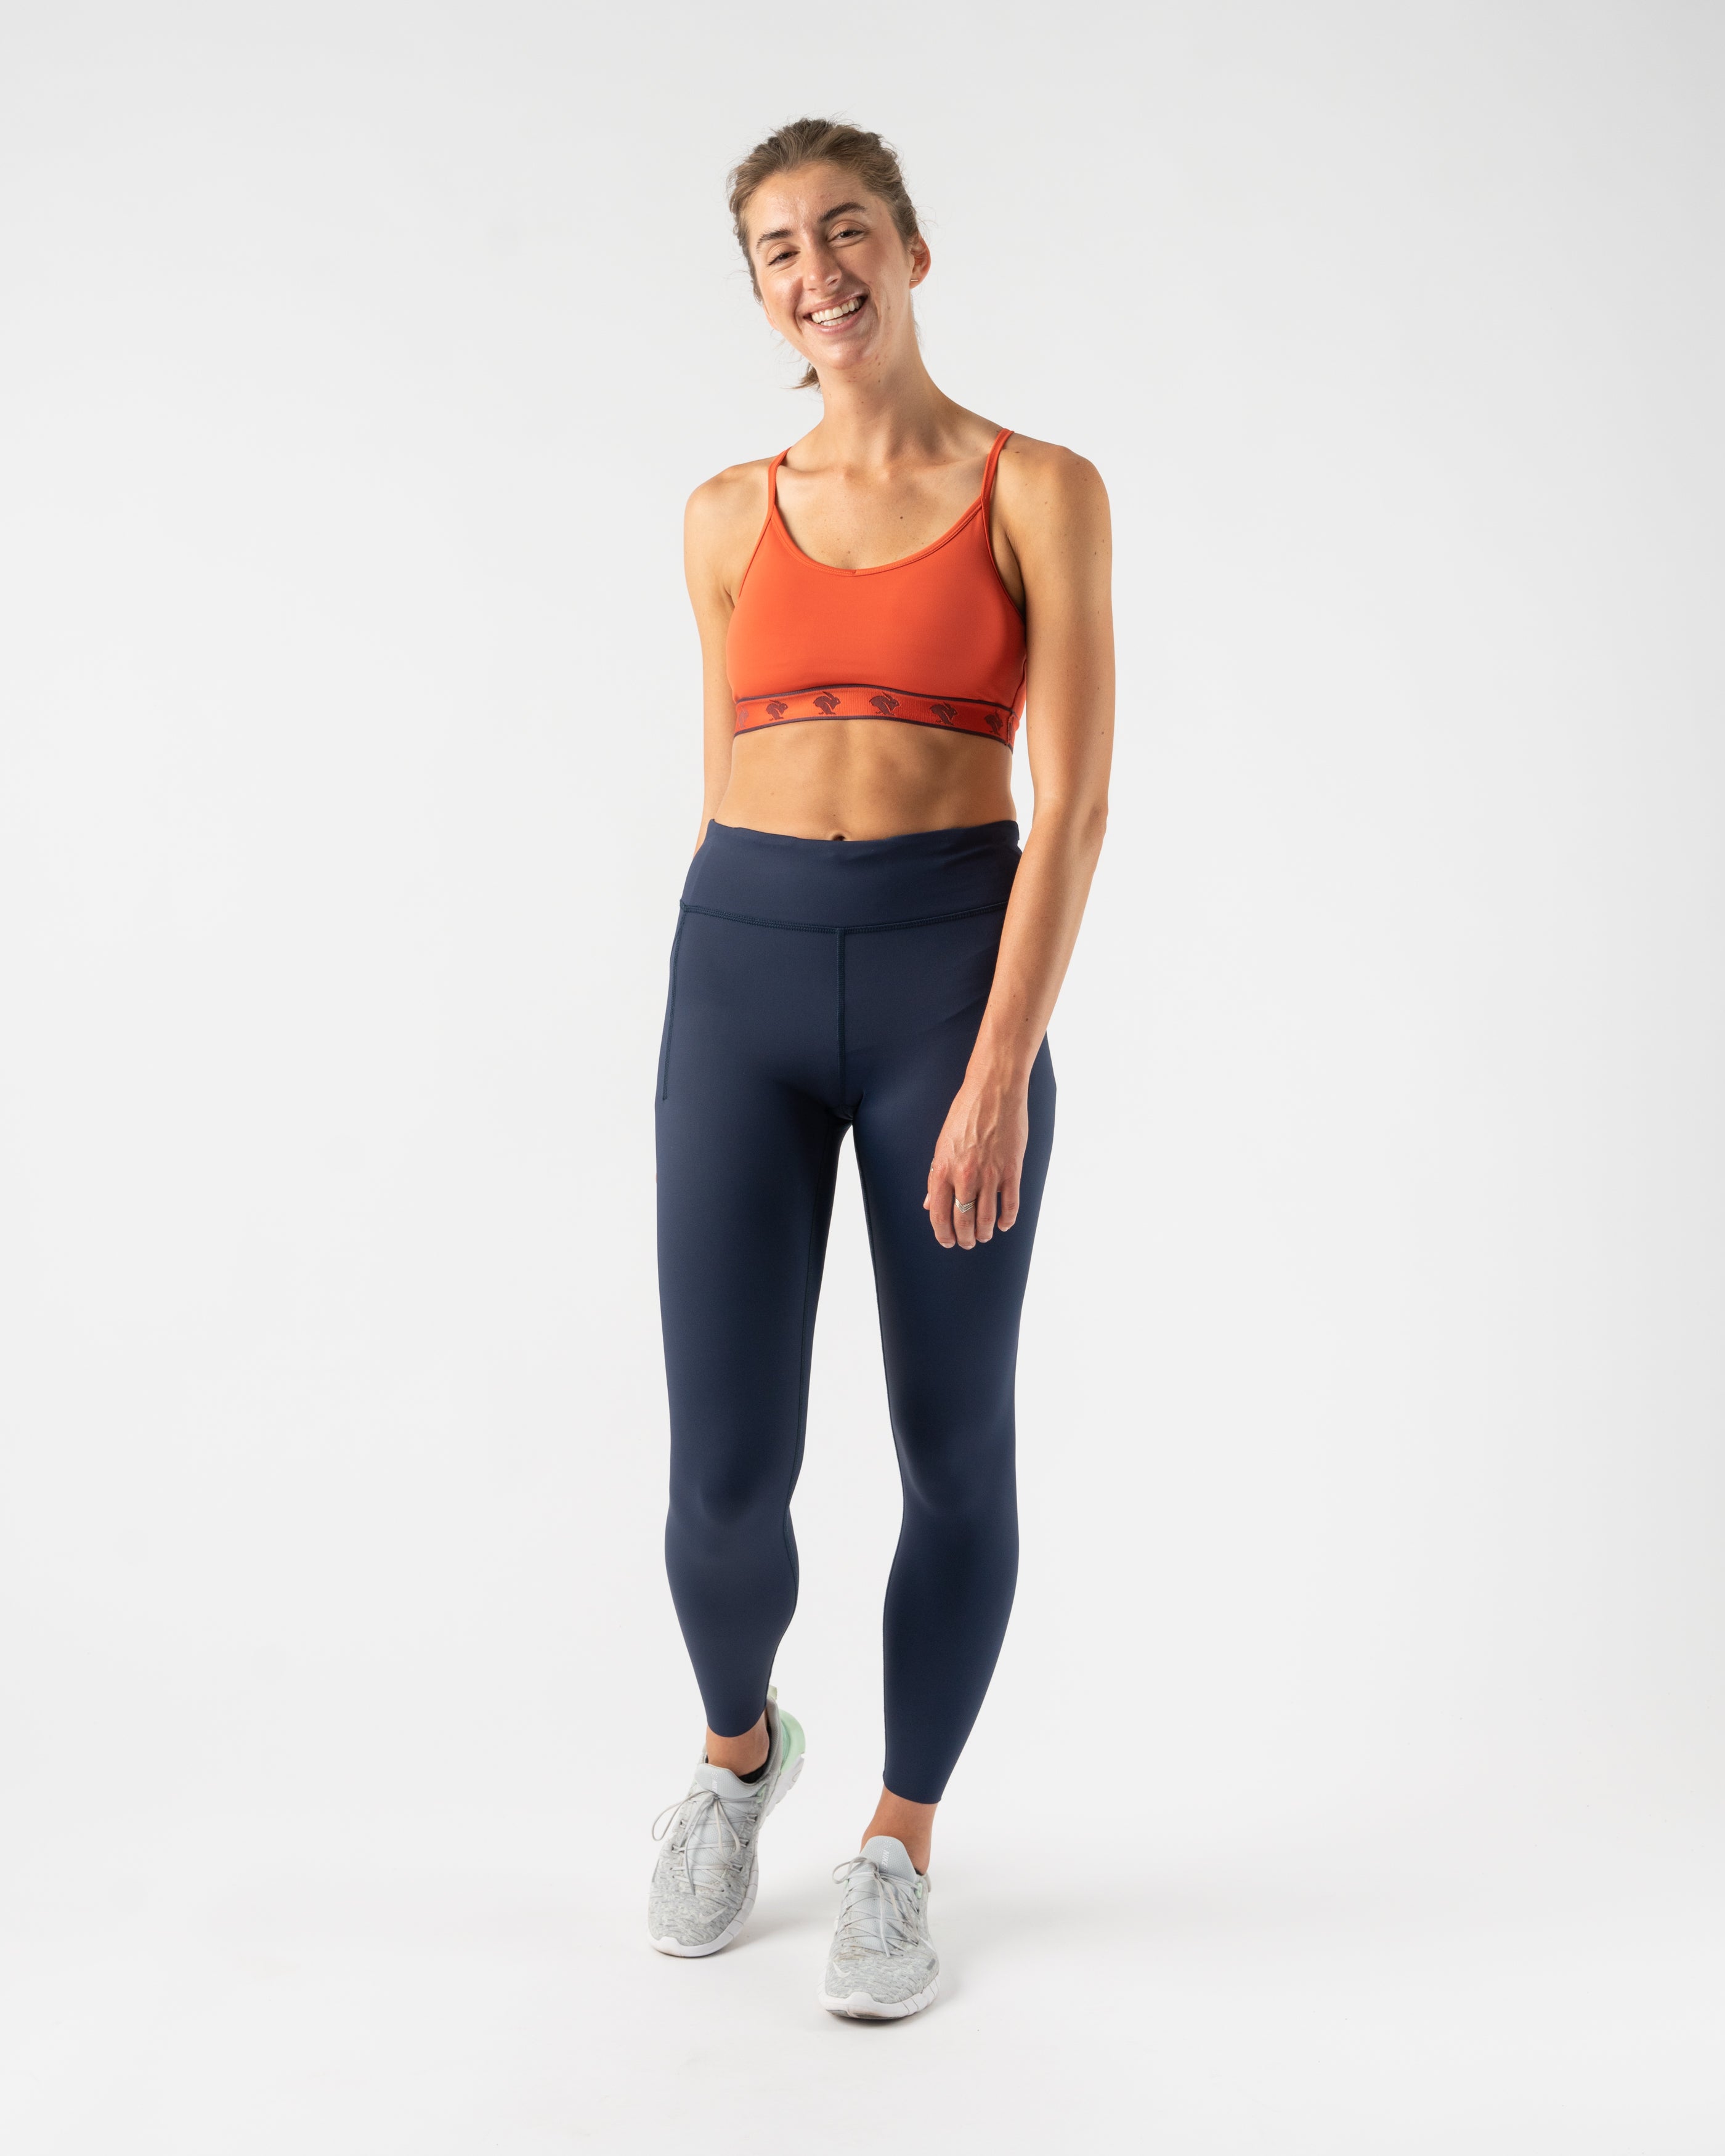 rabbit on Instagram: We can't choose favorites with our sports bras, but  if we had to pick one for functionality, Utilibra-vo steals the show 🌟  This top-seller not only minimizes bounce but